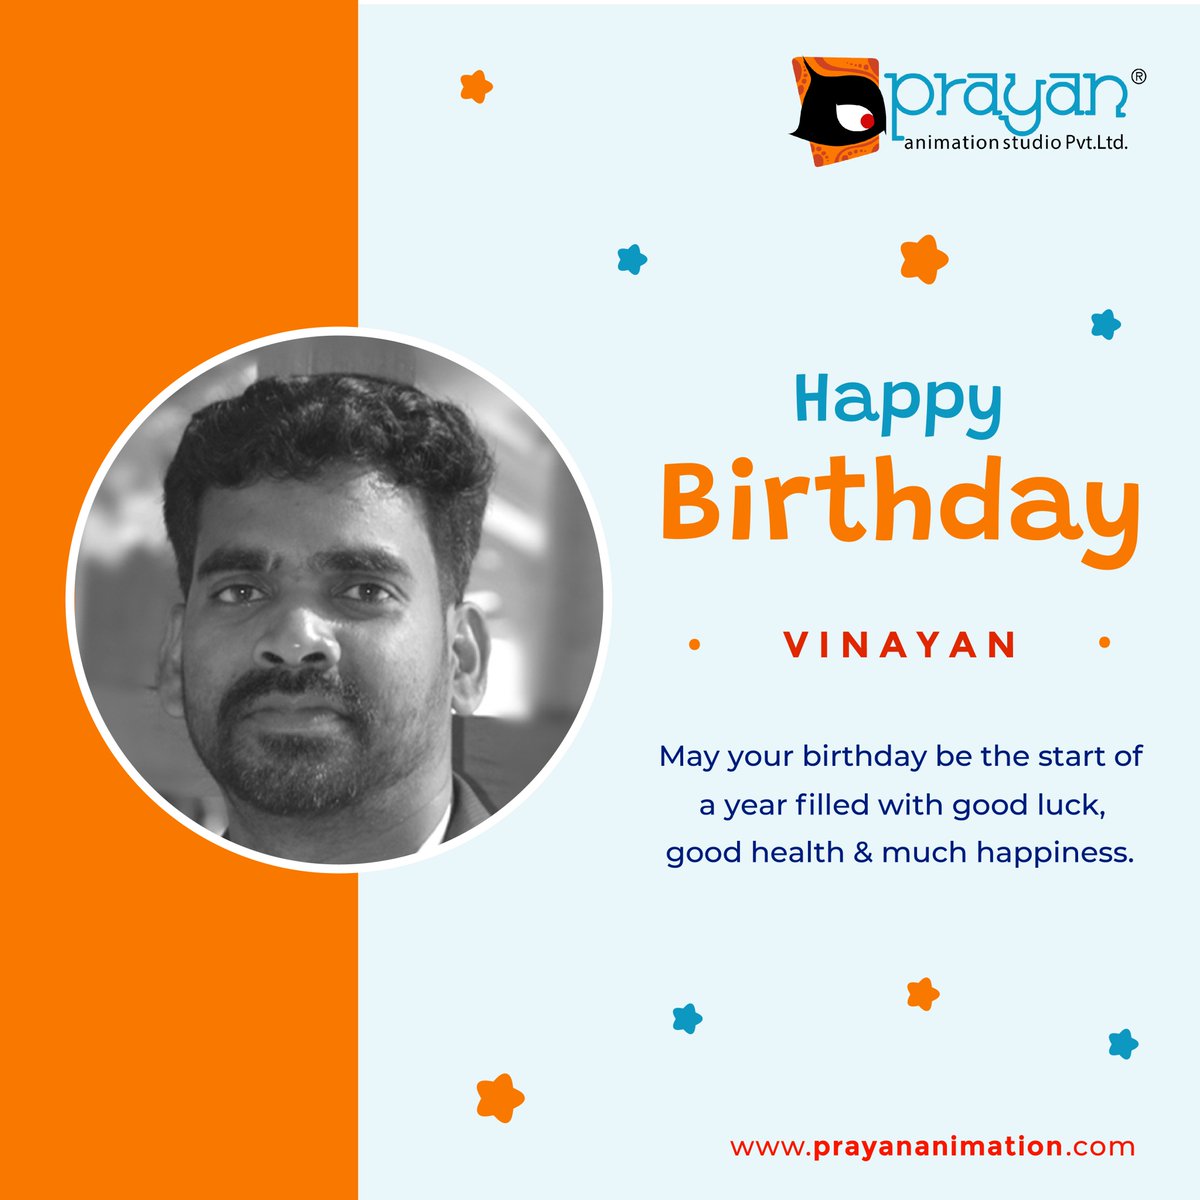 #HappyBirthday—may this year be filled with adventures, #blessings, and lots of laughs.

#BirthdayWishes #BirthdayCelebration #AnotherYearOfBlessings #PartyTime #BirthdayLove #MakingMemories #SpecialDay #HBD #PrayanAnimationStudio #birthdaywish #Prayan #birthday #PrayanAnimation